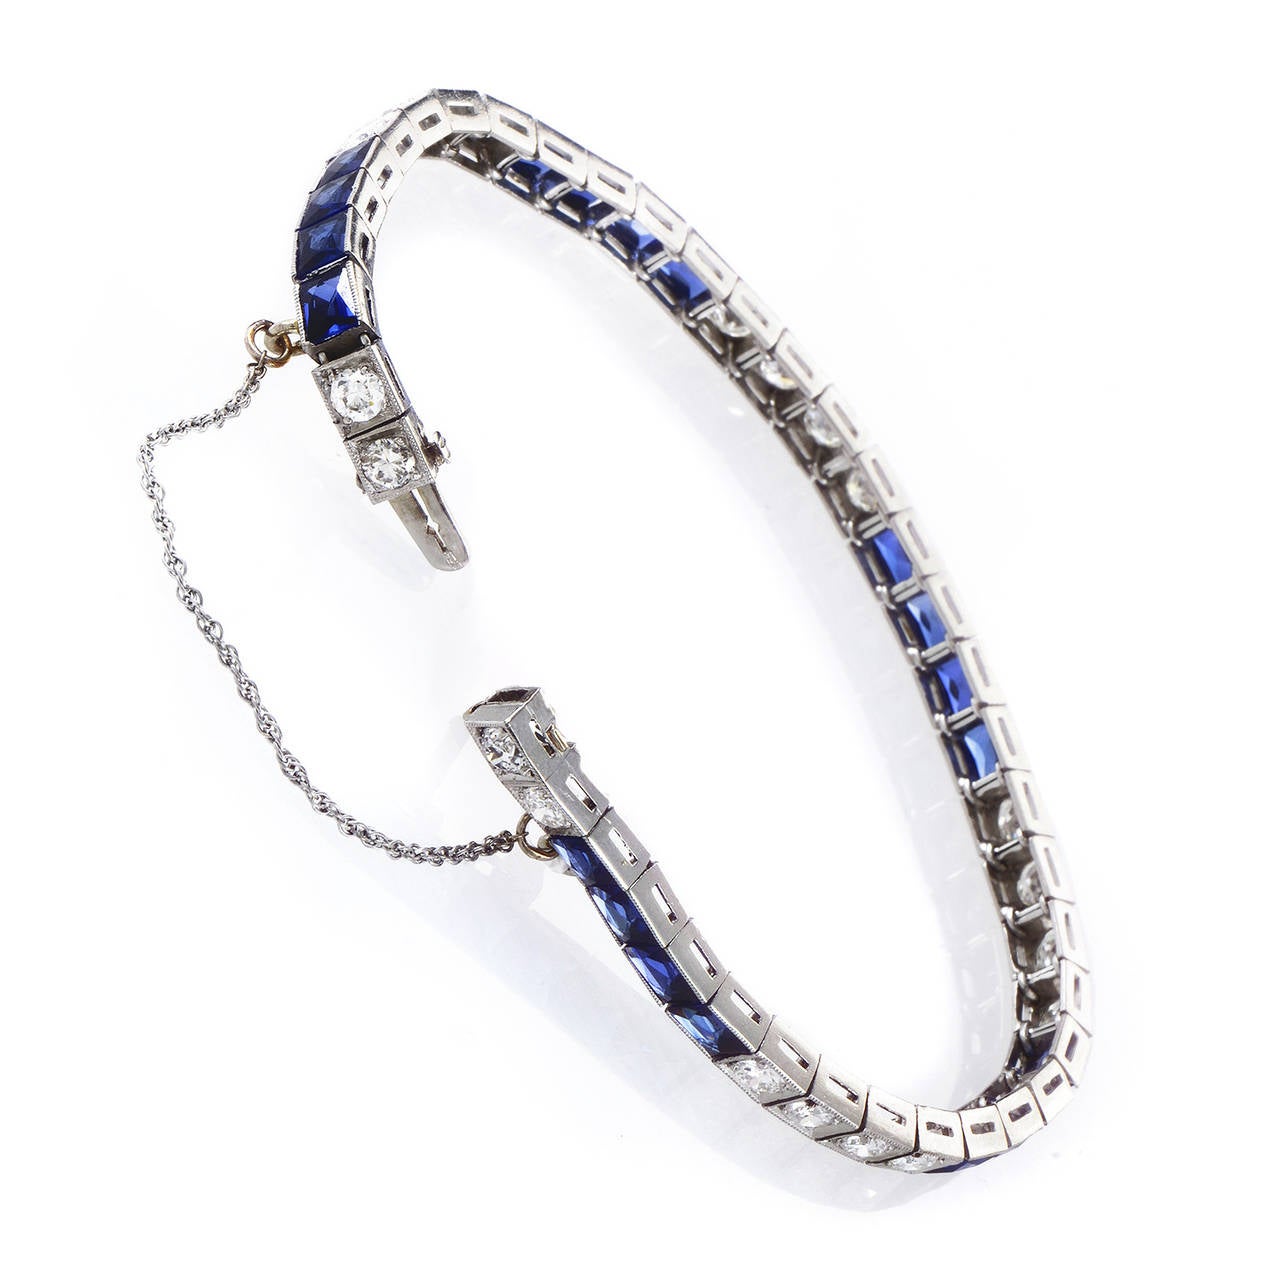 This gorgeous antique design will always be in style. The bracelet is made of platinum and is set with white diamonds and blue stones.

Diamond Carat Weight: 4.00